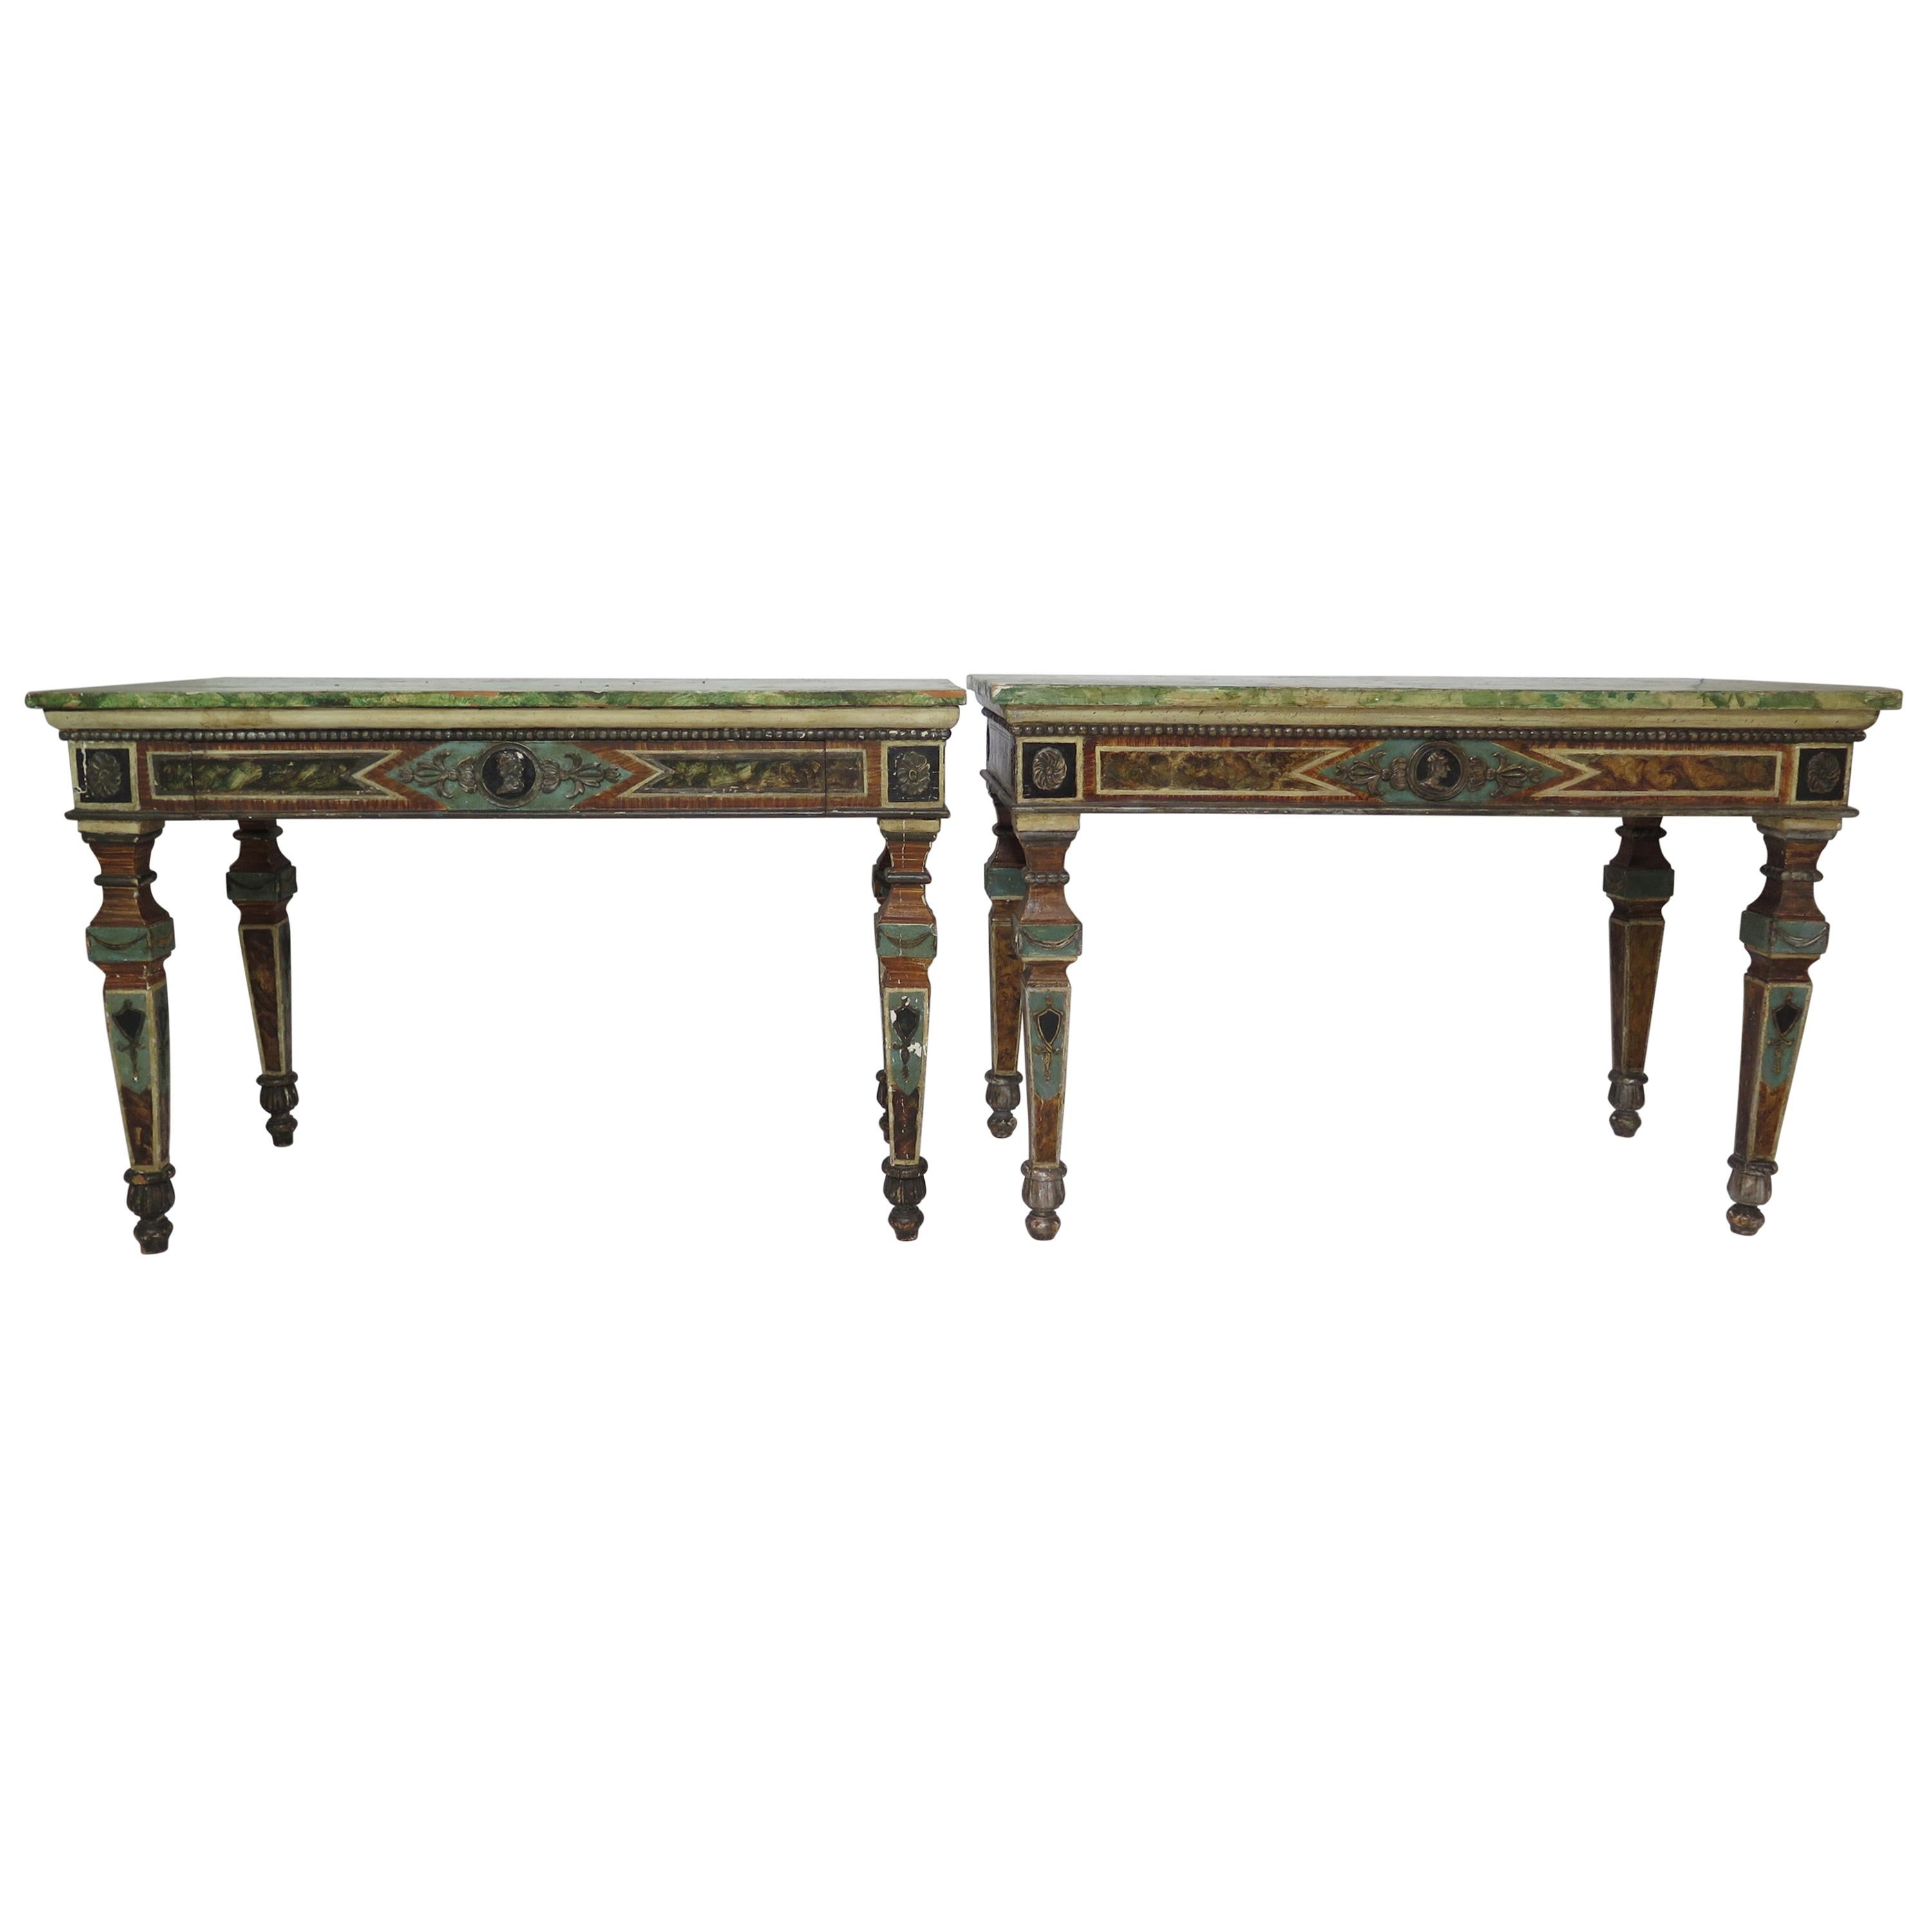 Pair of Italian Neoclassic Style Polychrome Painted Console Tables